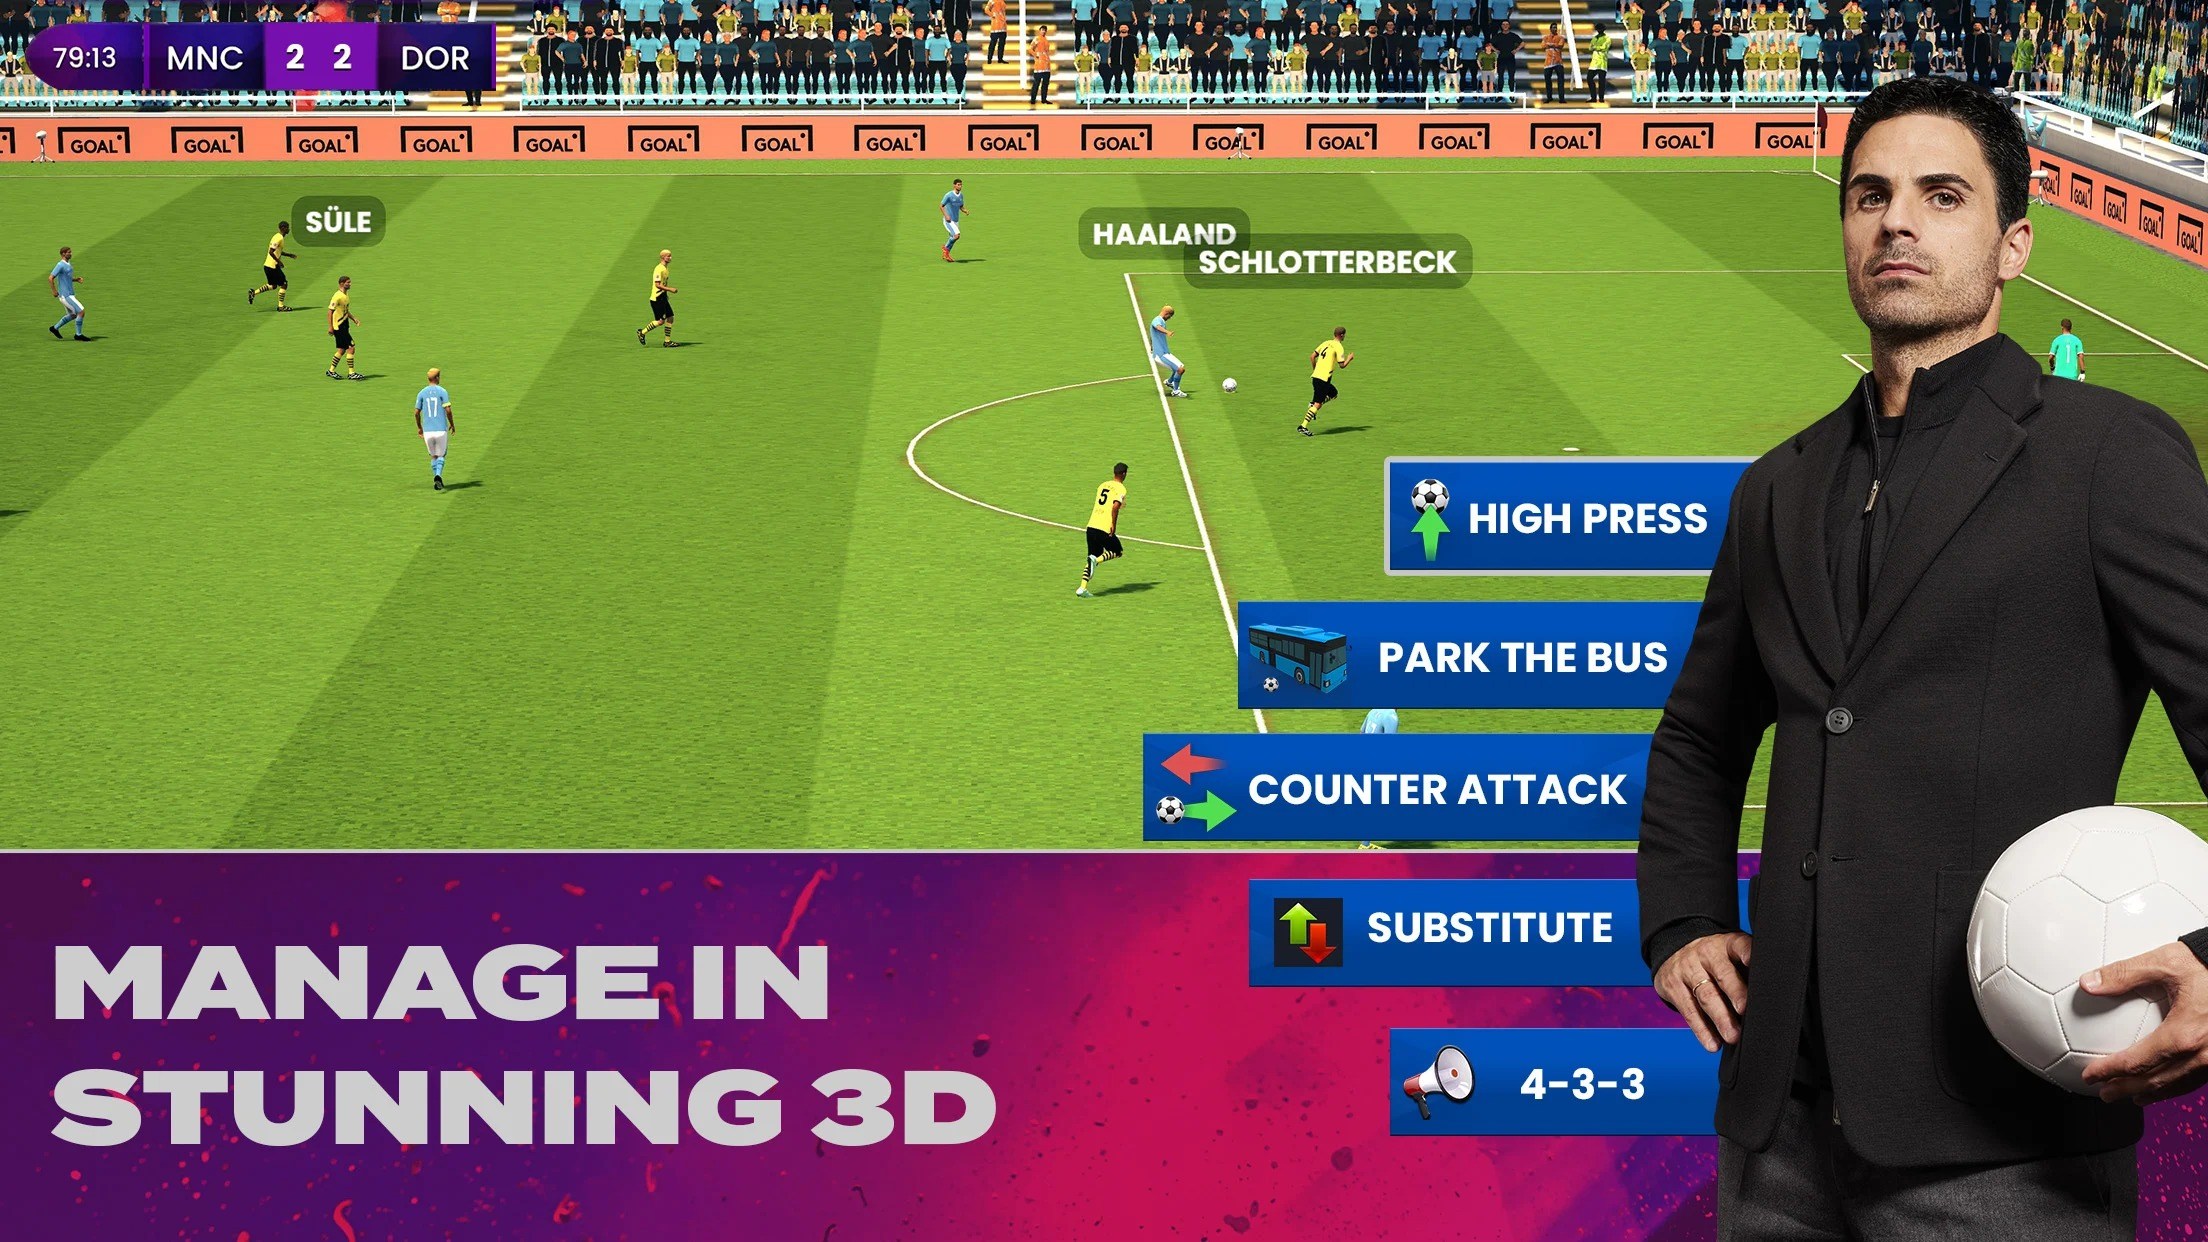 Championship Manager 17 Gameplay iOS / Android 